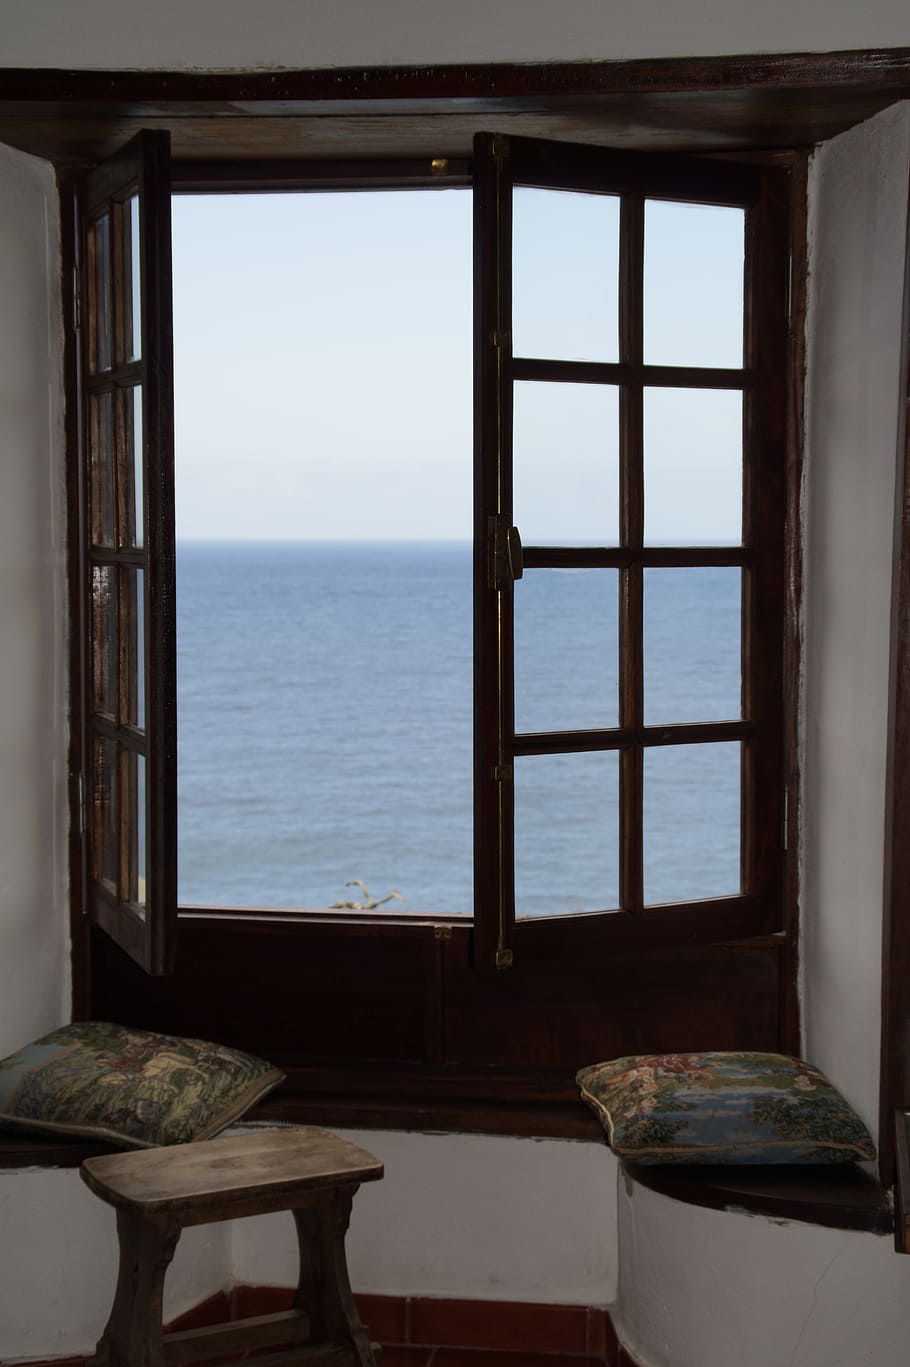 Window, View, Sea, Atlantic, window with a view, holiday house, holiday, rest, recovery, sound of the sea